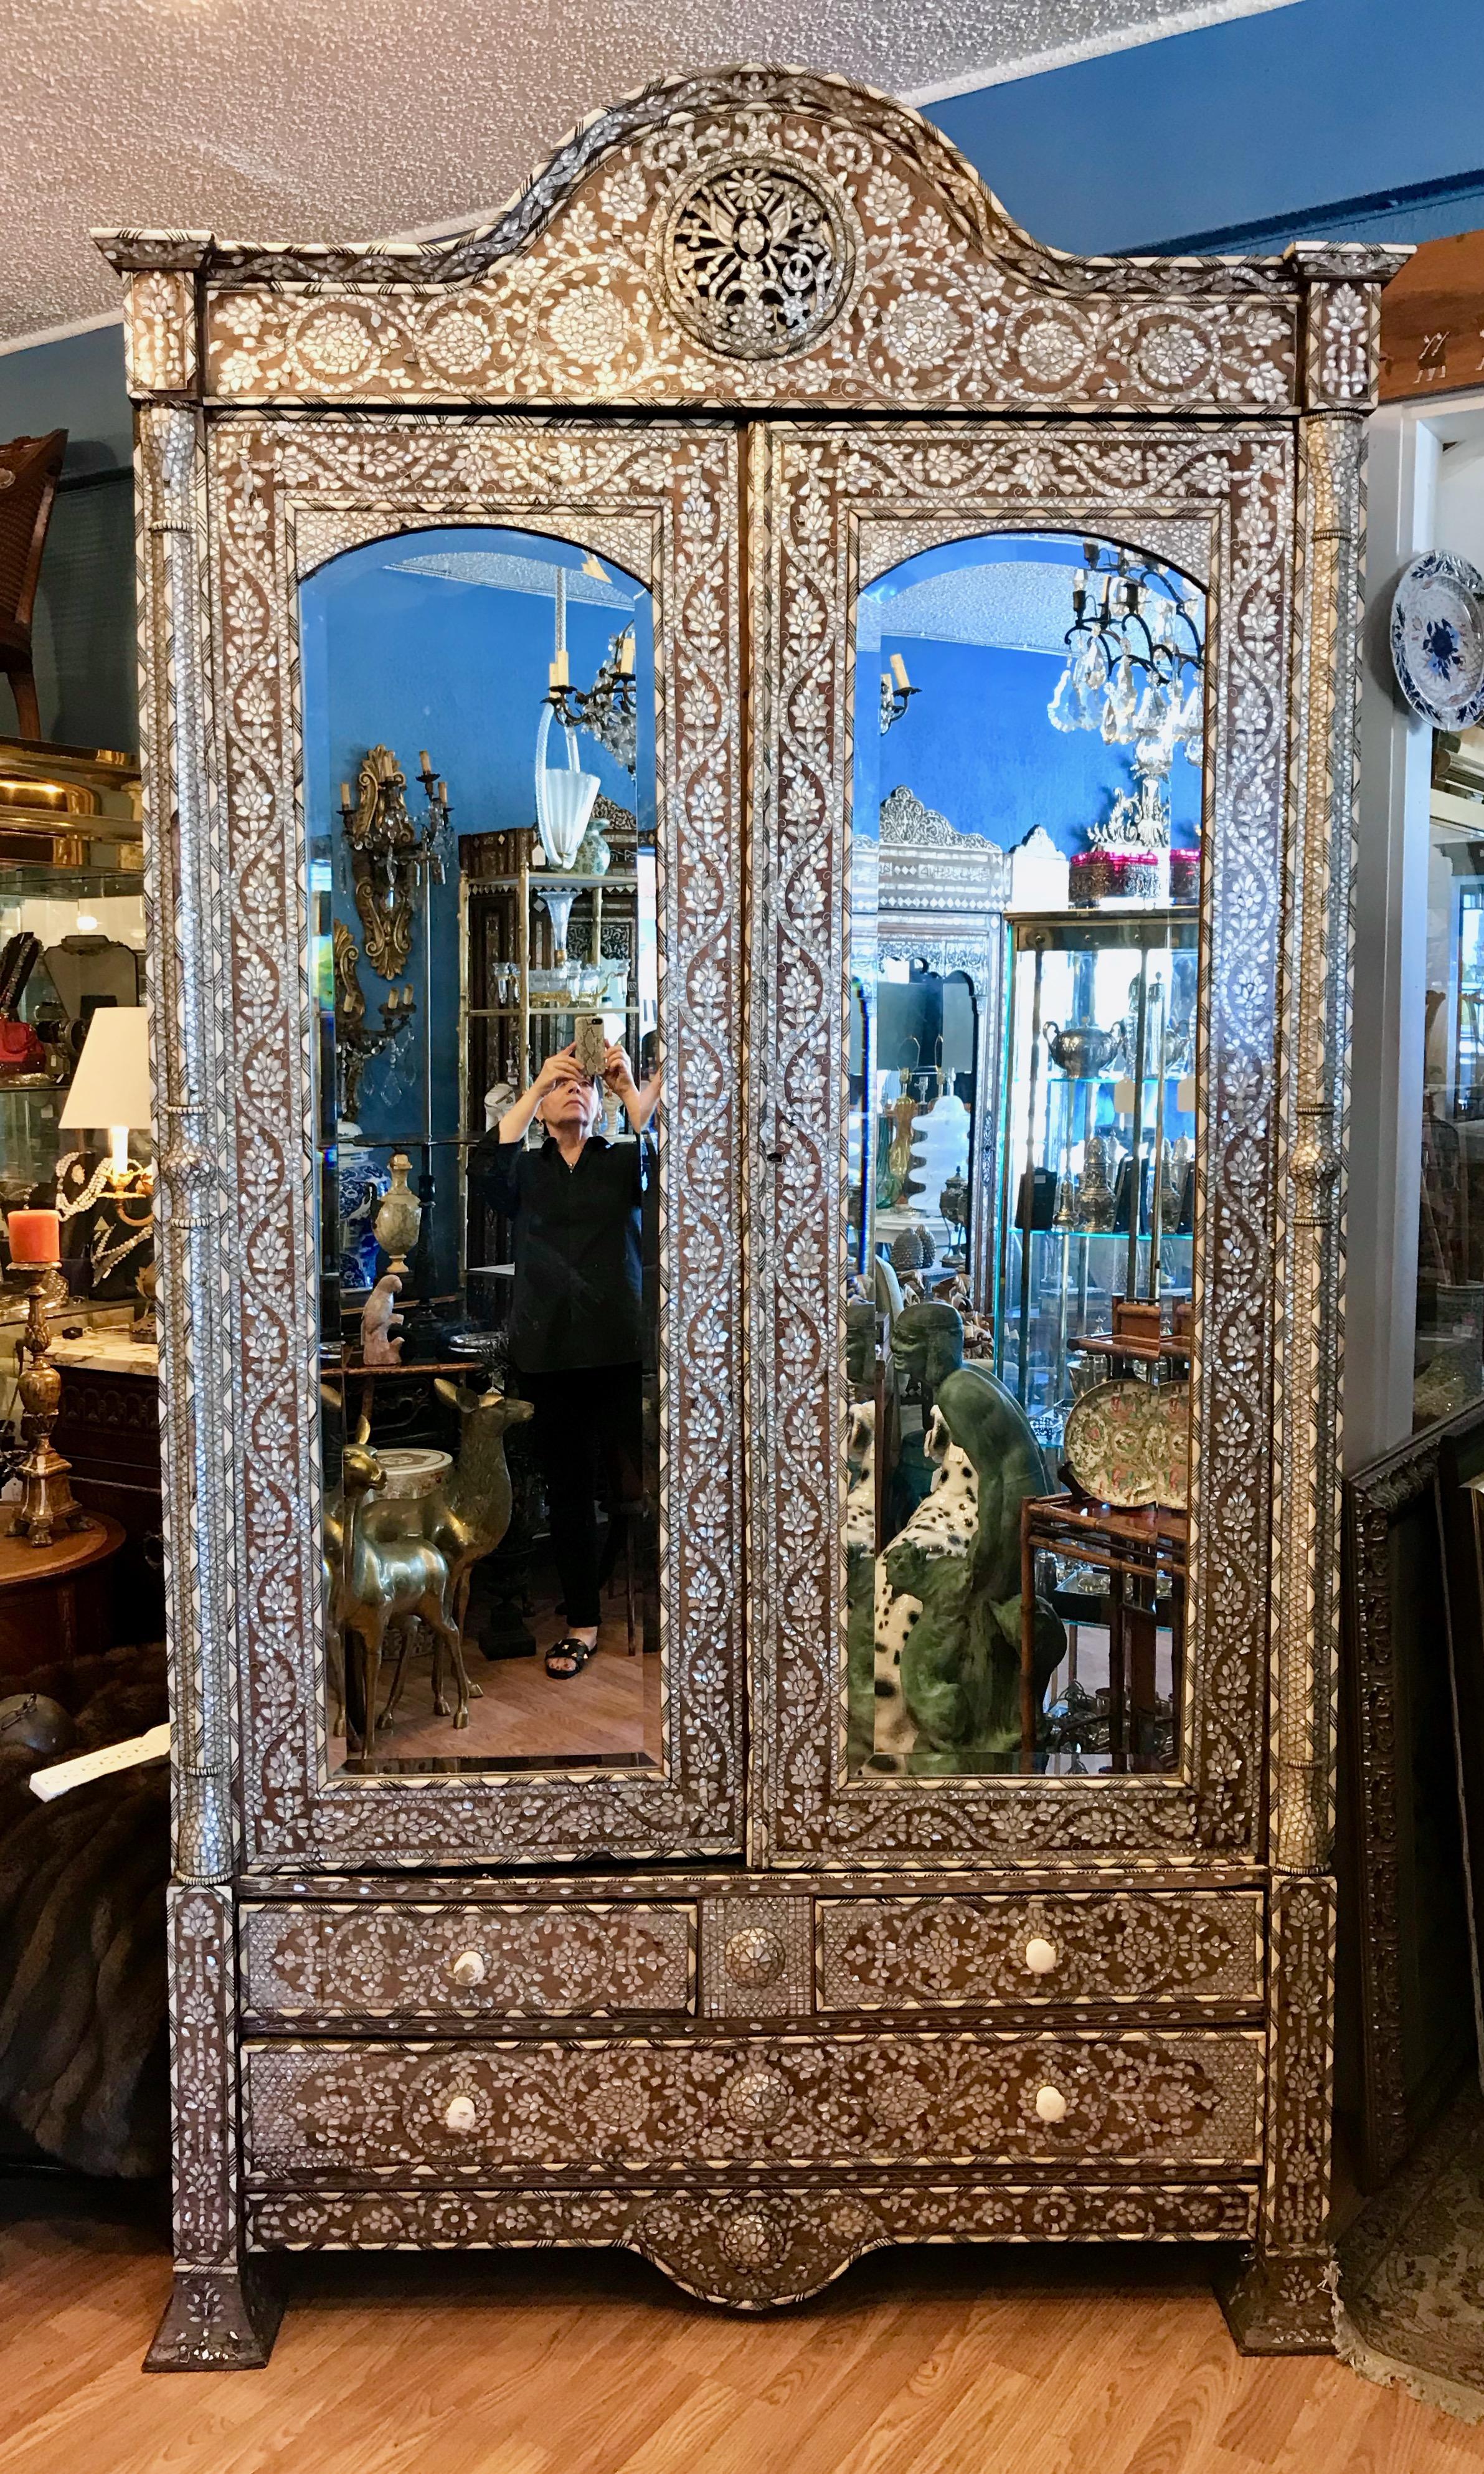 The finest quality ! Absolutely stunning ! 
Fashioned with intricate inlays of mother of pearl surrounded 
by metals inlays. The piece is in a remarkable state of preservation.
The interior is fitted with removable shelving unit - preserving the